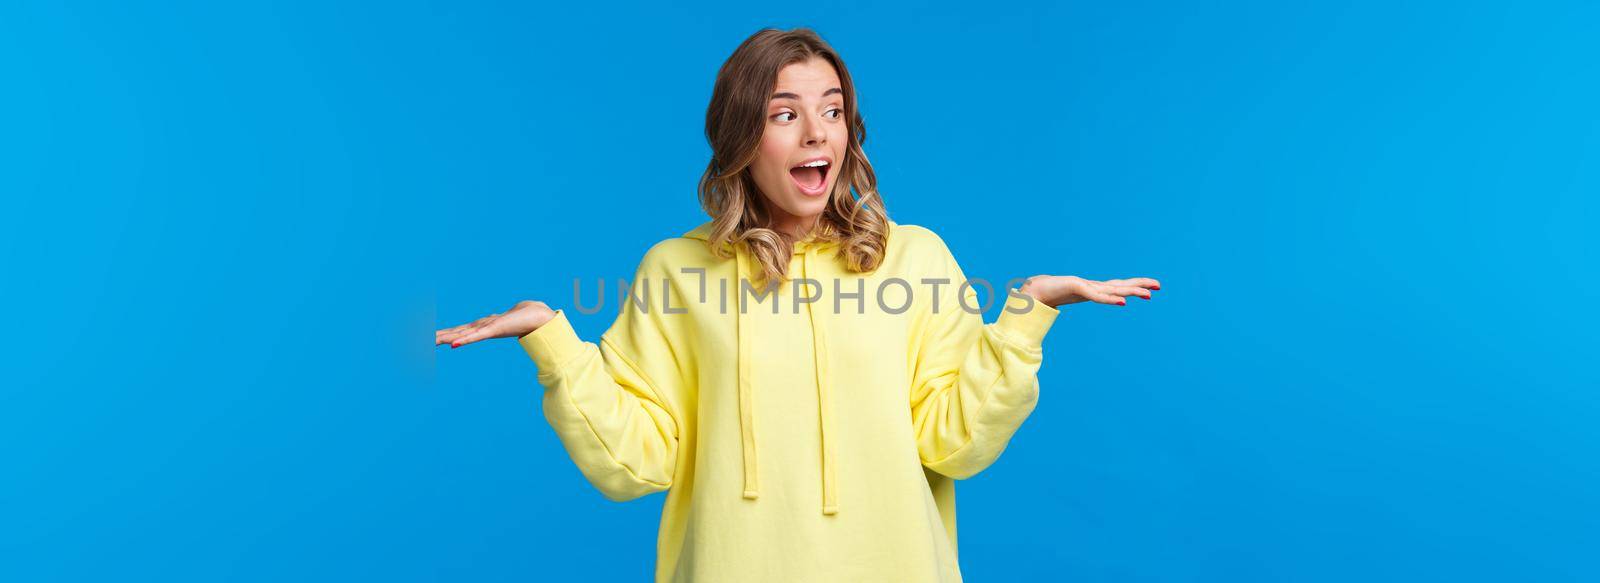 Girl weighing two choices as making decision, look away picking between products she holding in arms on left and right side, standing excited over blue background.